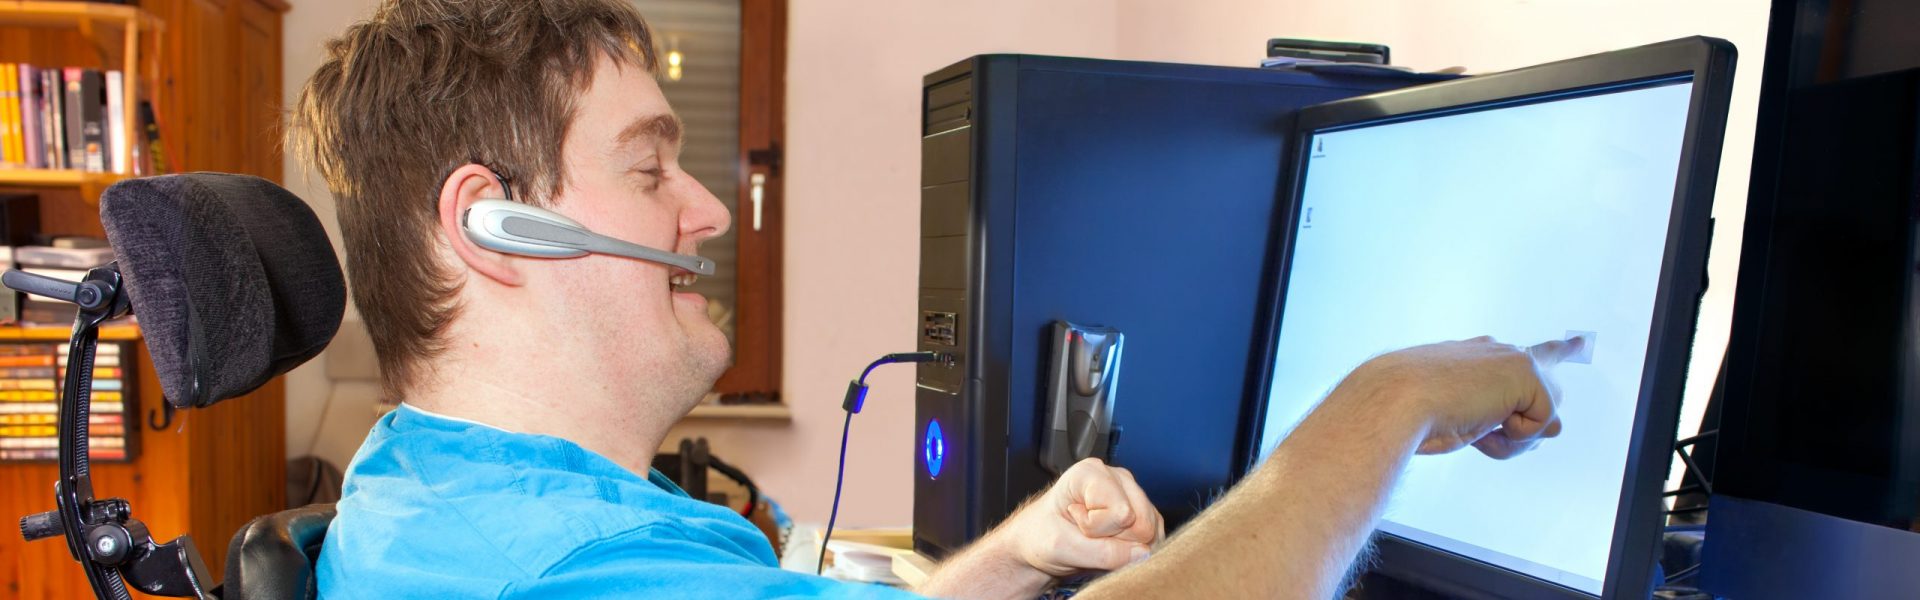 Man with infantile cerebral palsy using a computer with a wireless headset, reaching out to touch the touch screen